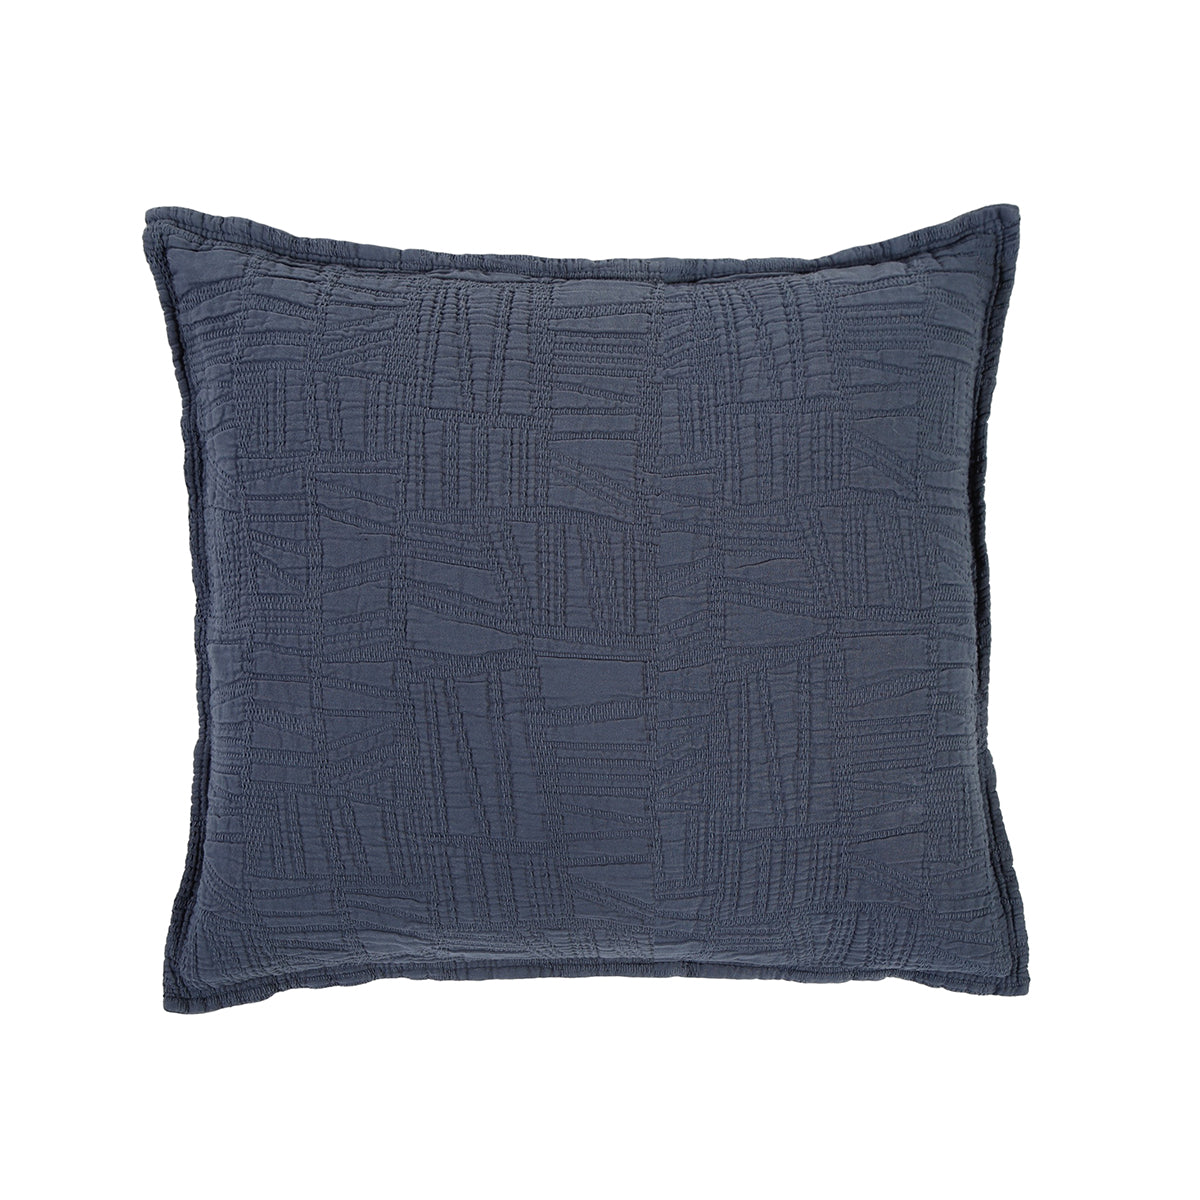 harbour matelasse collection - navy color - euro - pom pom at home